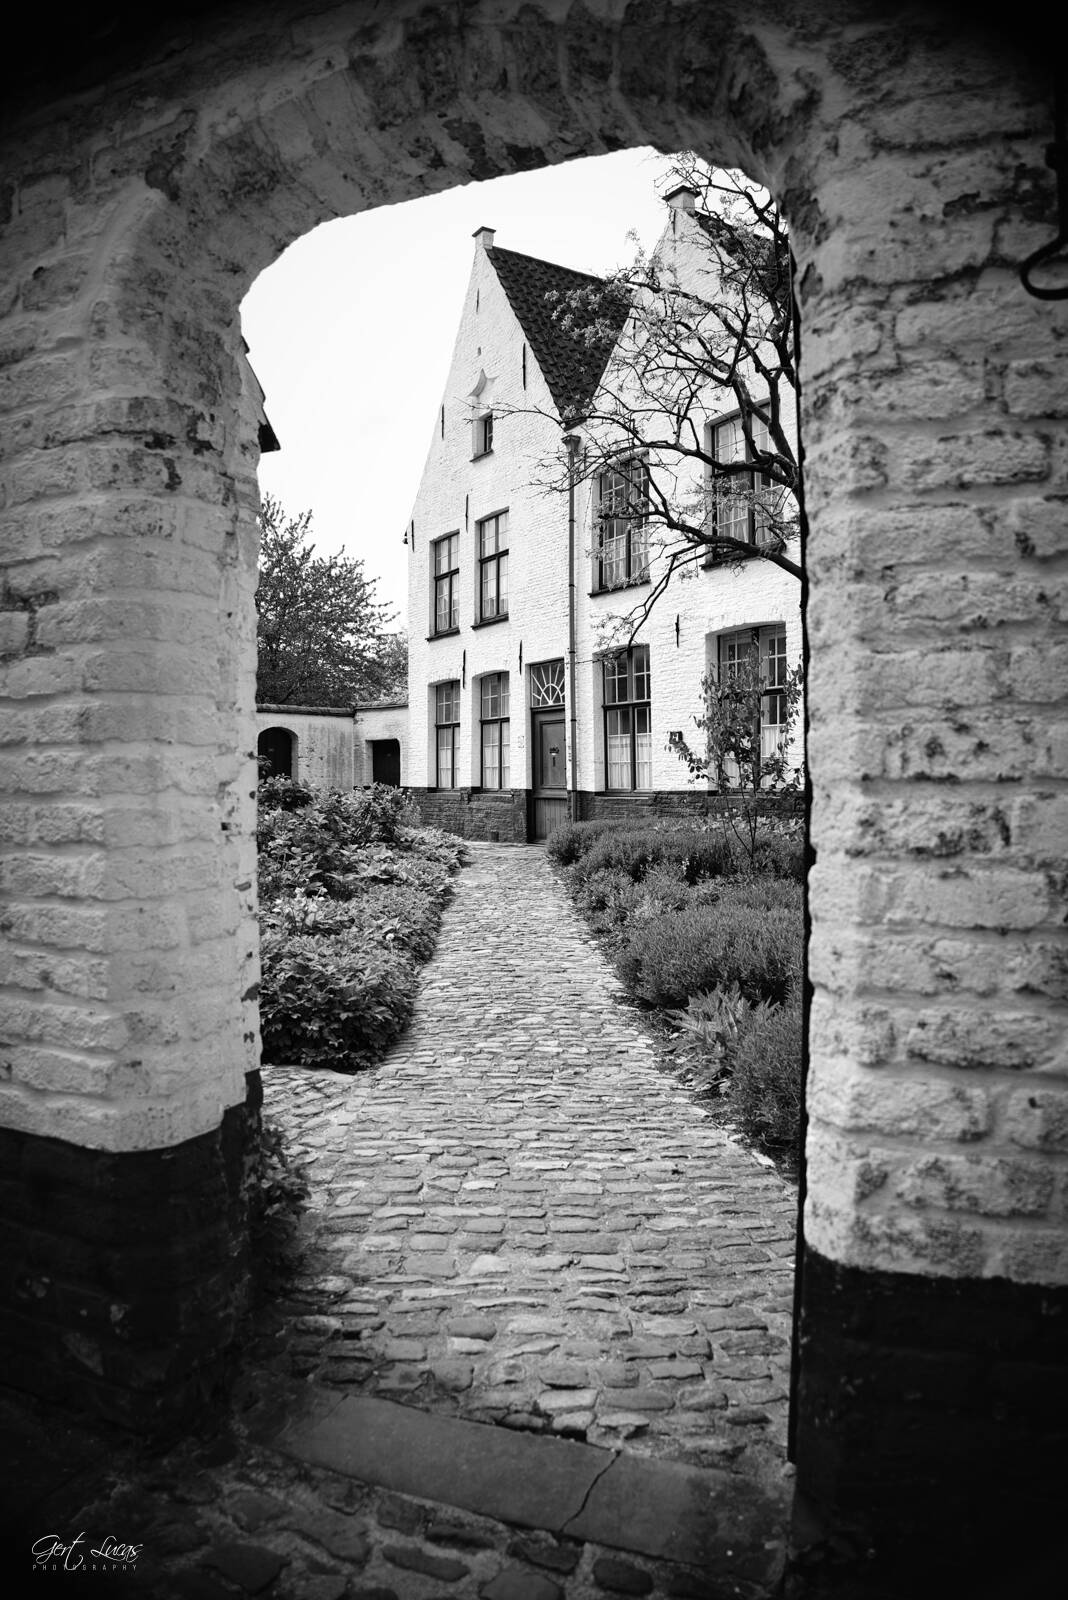 Image of Beguinage by Gert Lucas